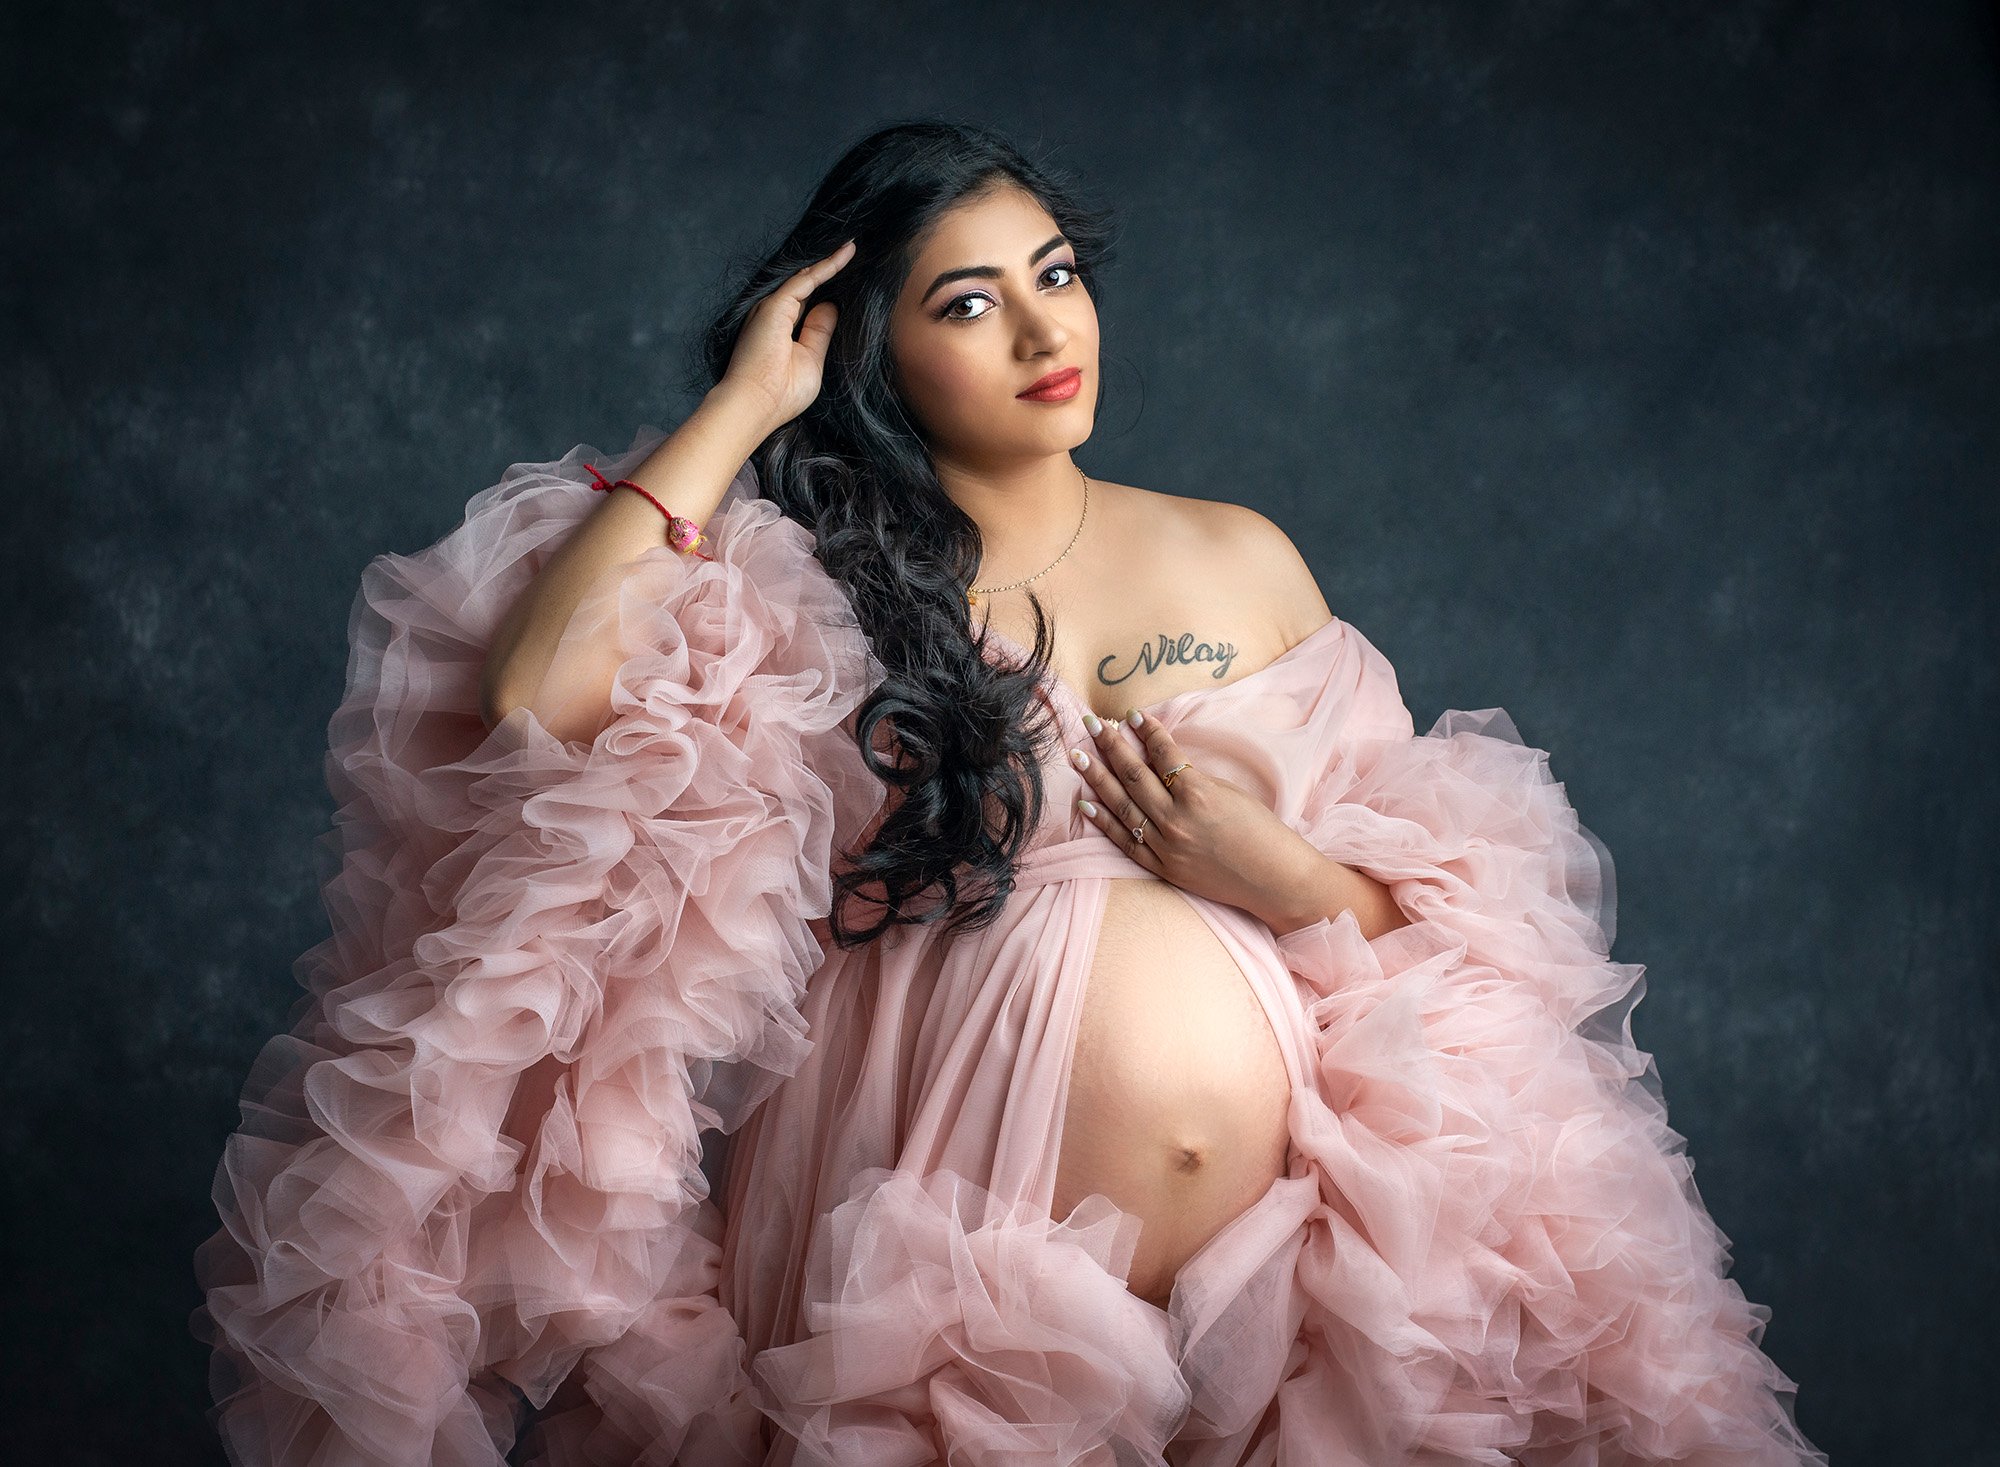 Indian Goddess Maternity photographs pregnant woman wearing ruffled pink dress exposing pregnant stomach